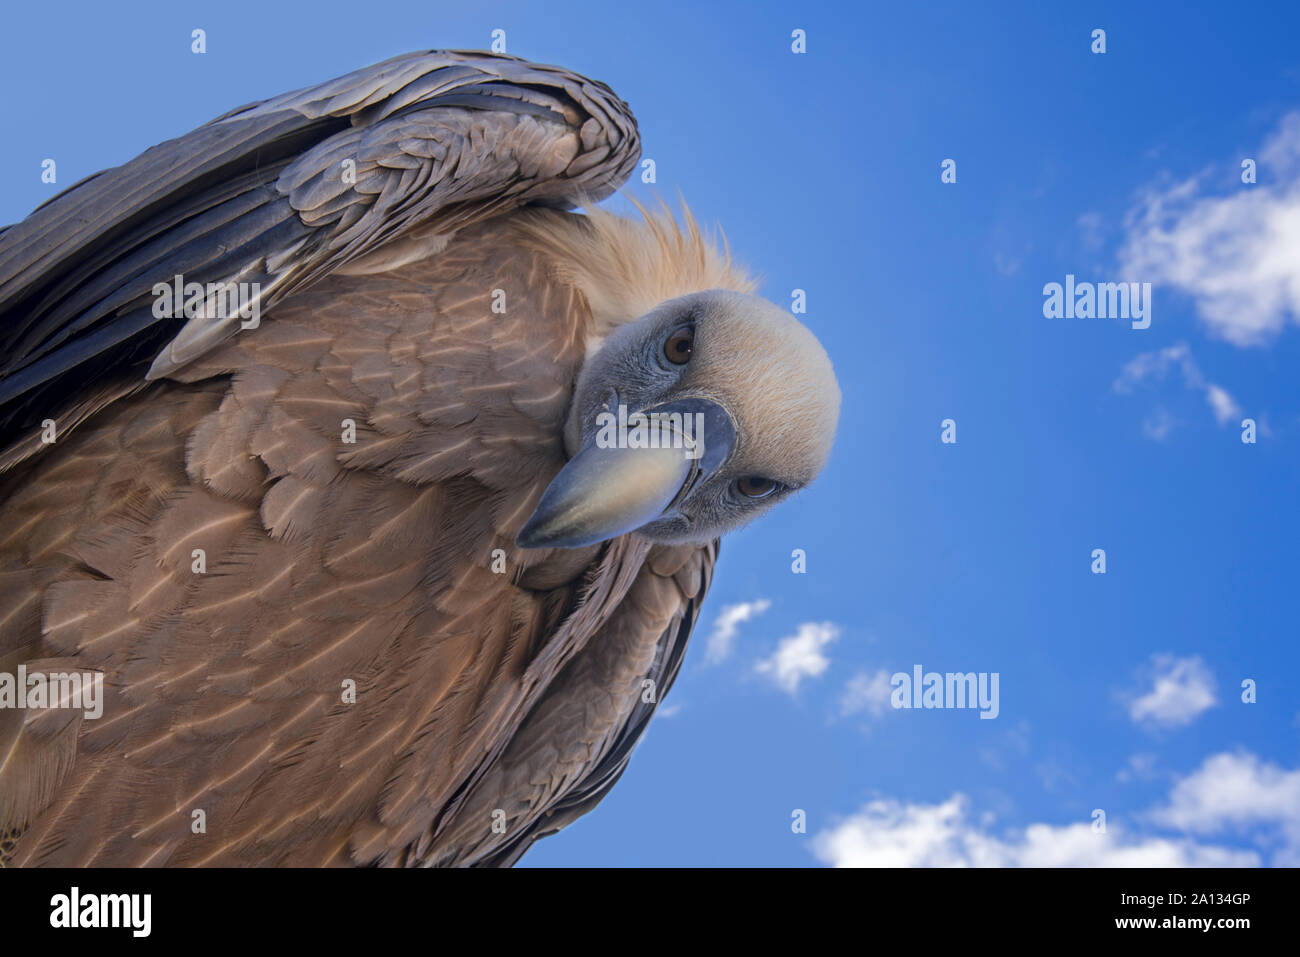 Worm's-eye view on griffon vulture (Gyps fulvus) looking down on prey against blue sky with white clouds Stock Photo